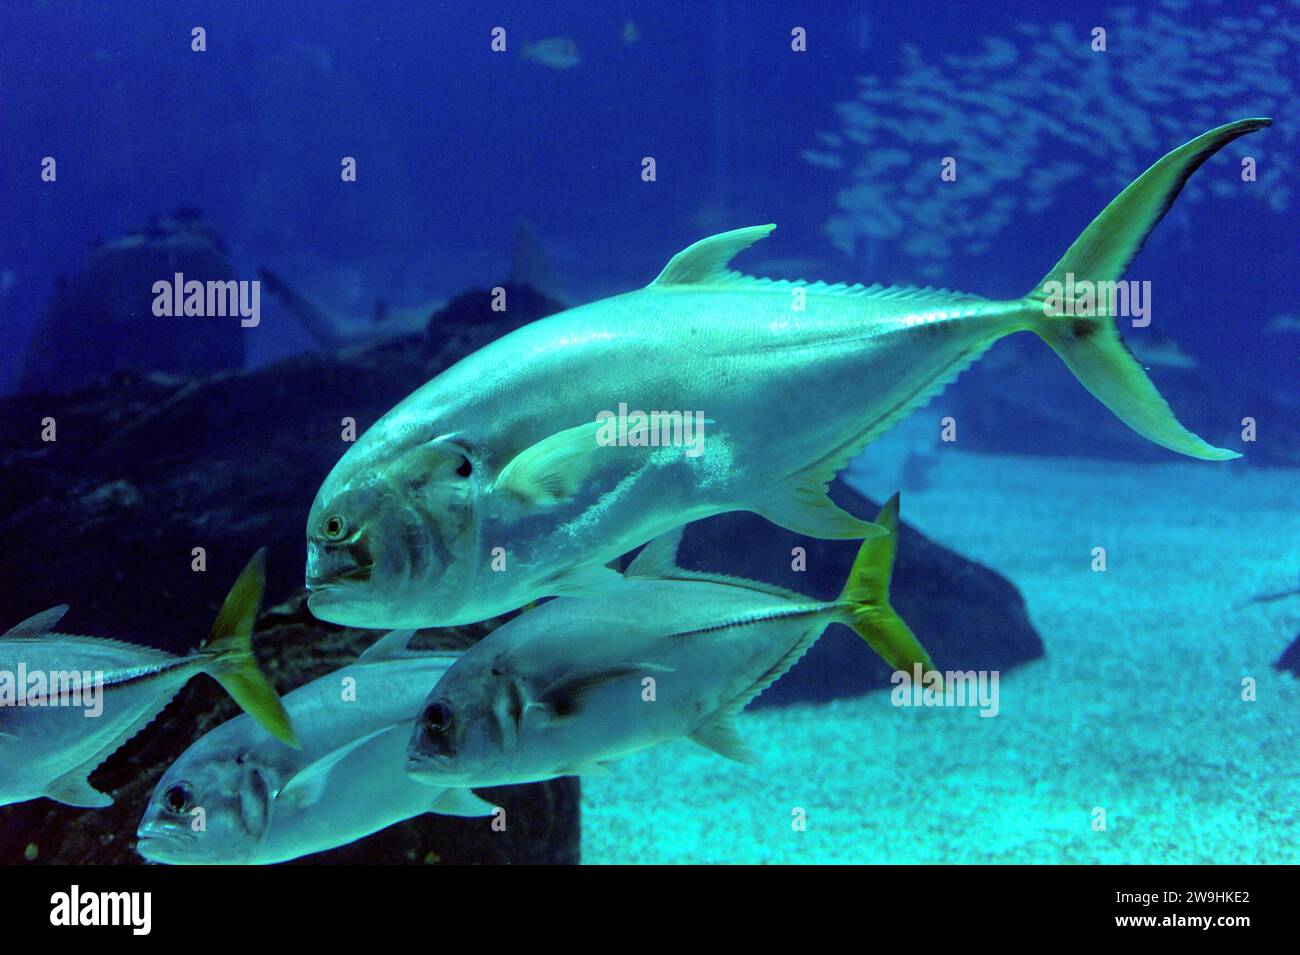 Common jack or crevalle jack (Caranx hippos) is a marine fish native to Mediterranean Sea and central eastern and western Atlantic Ocean. Stock Photo